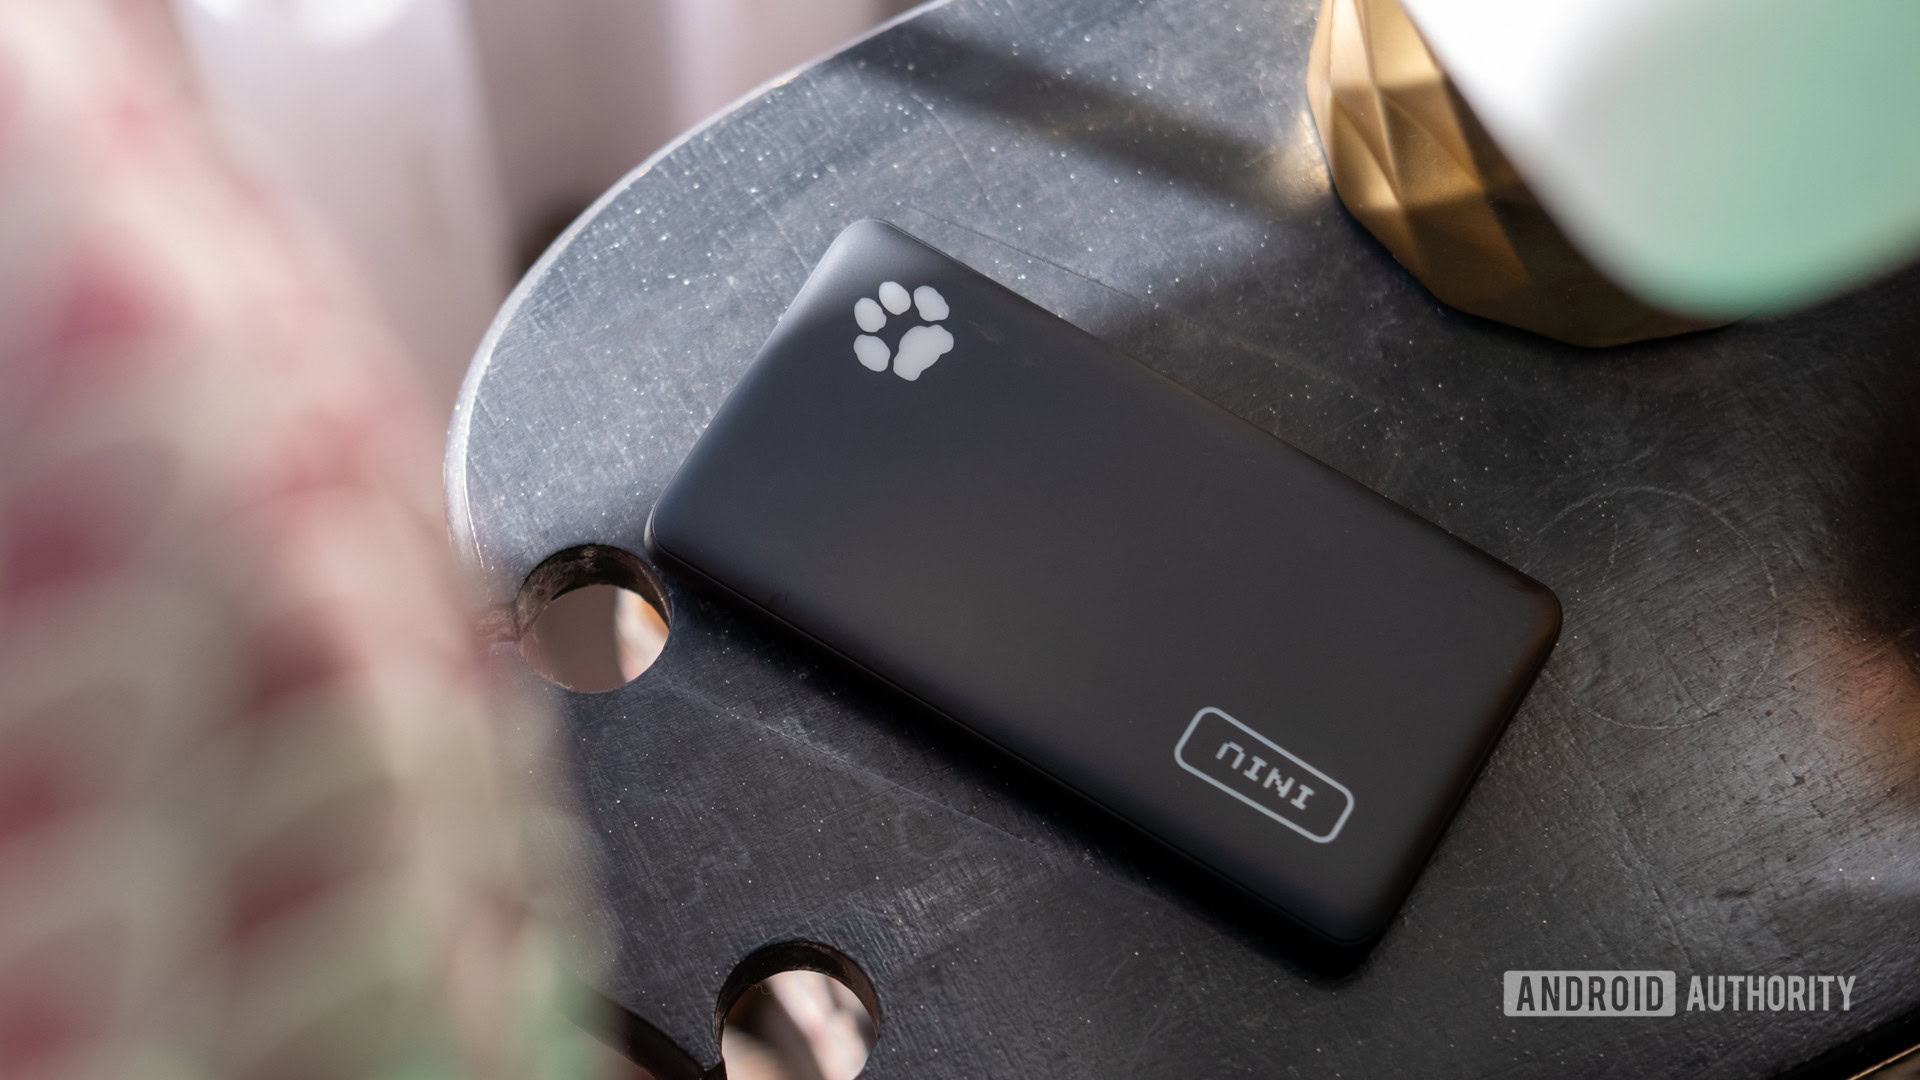 Iniu power bank review (10,000mAh): Small and solid, but slow